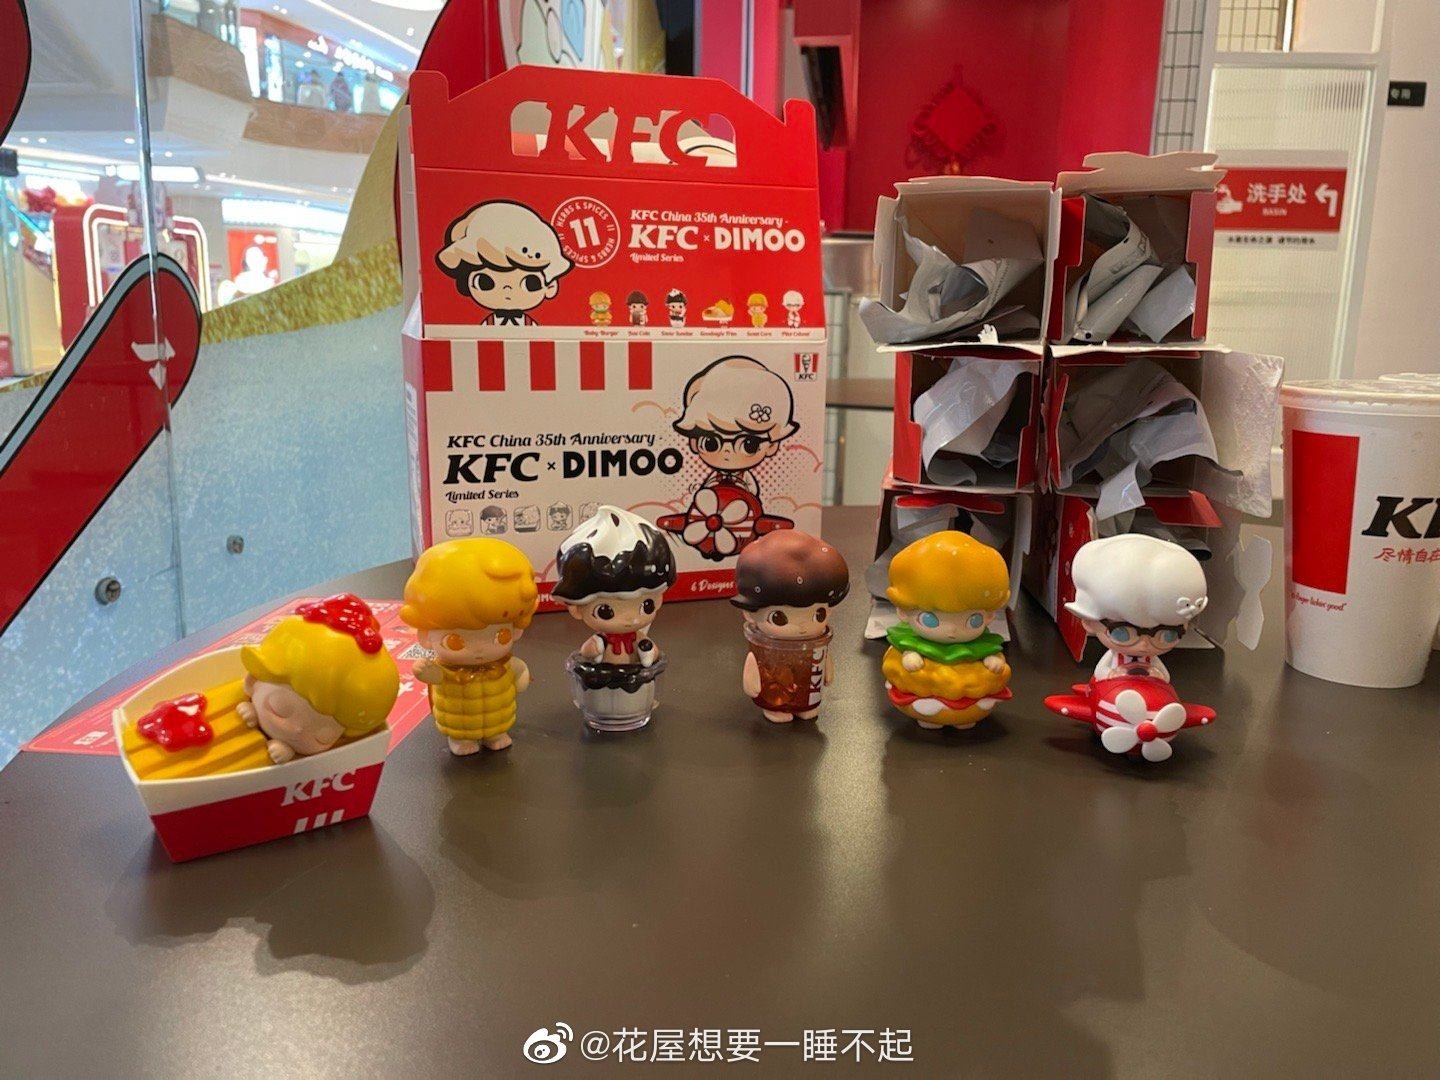 KFC China's Dimoo 'blind boxes' under fire as toy promotion fuels frenzy of  wastefulness, overspending | South China Morning Post